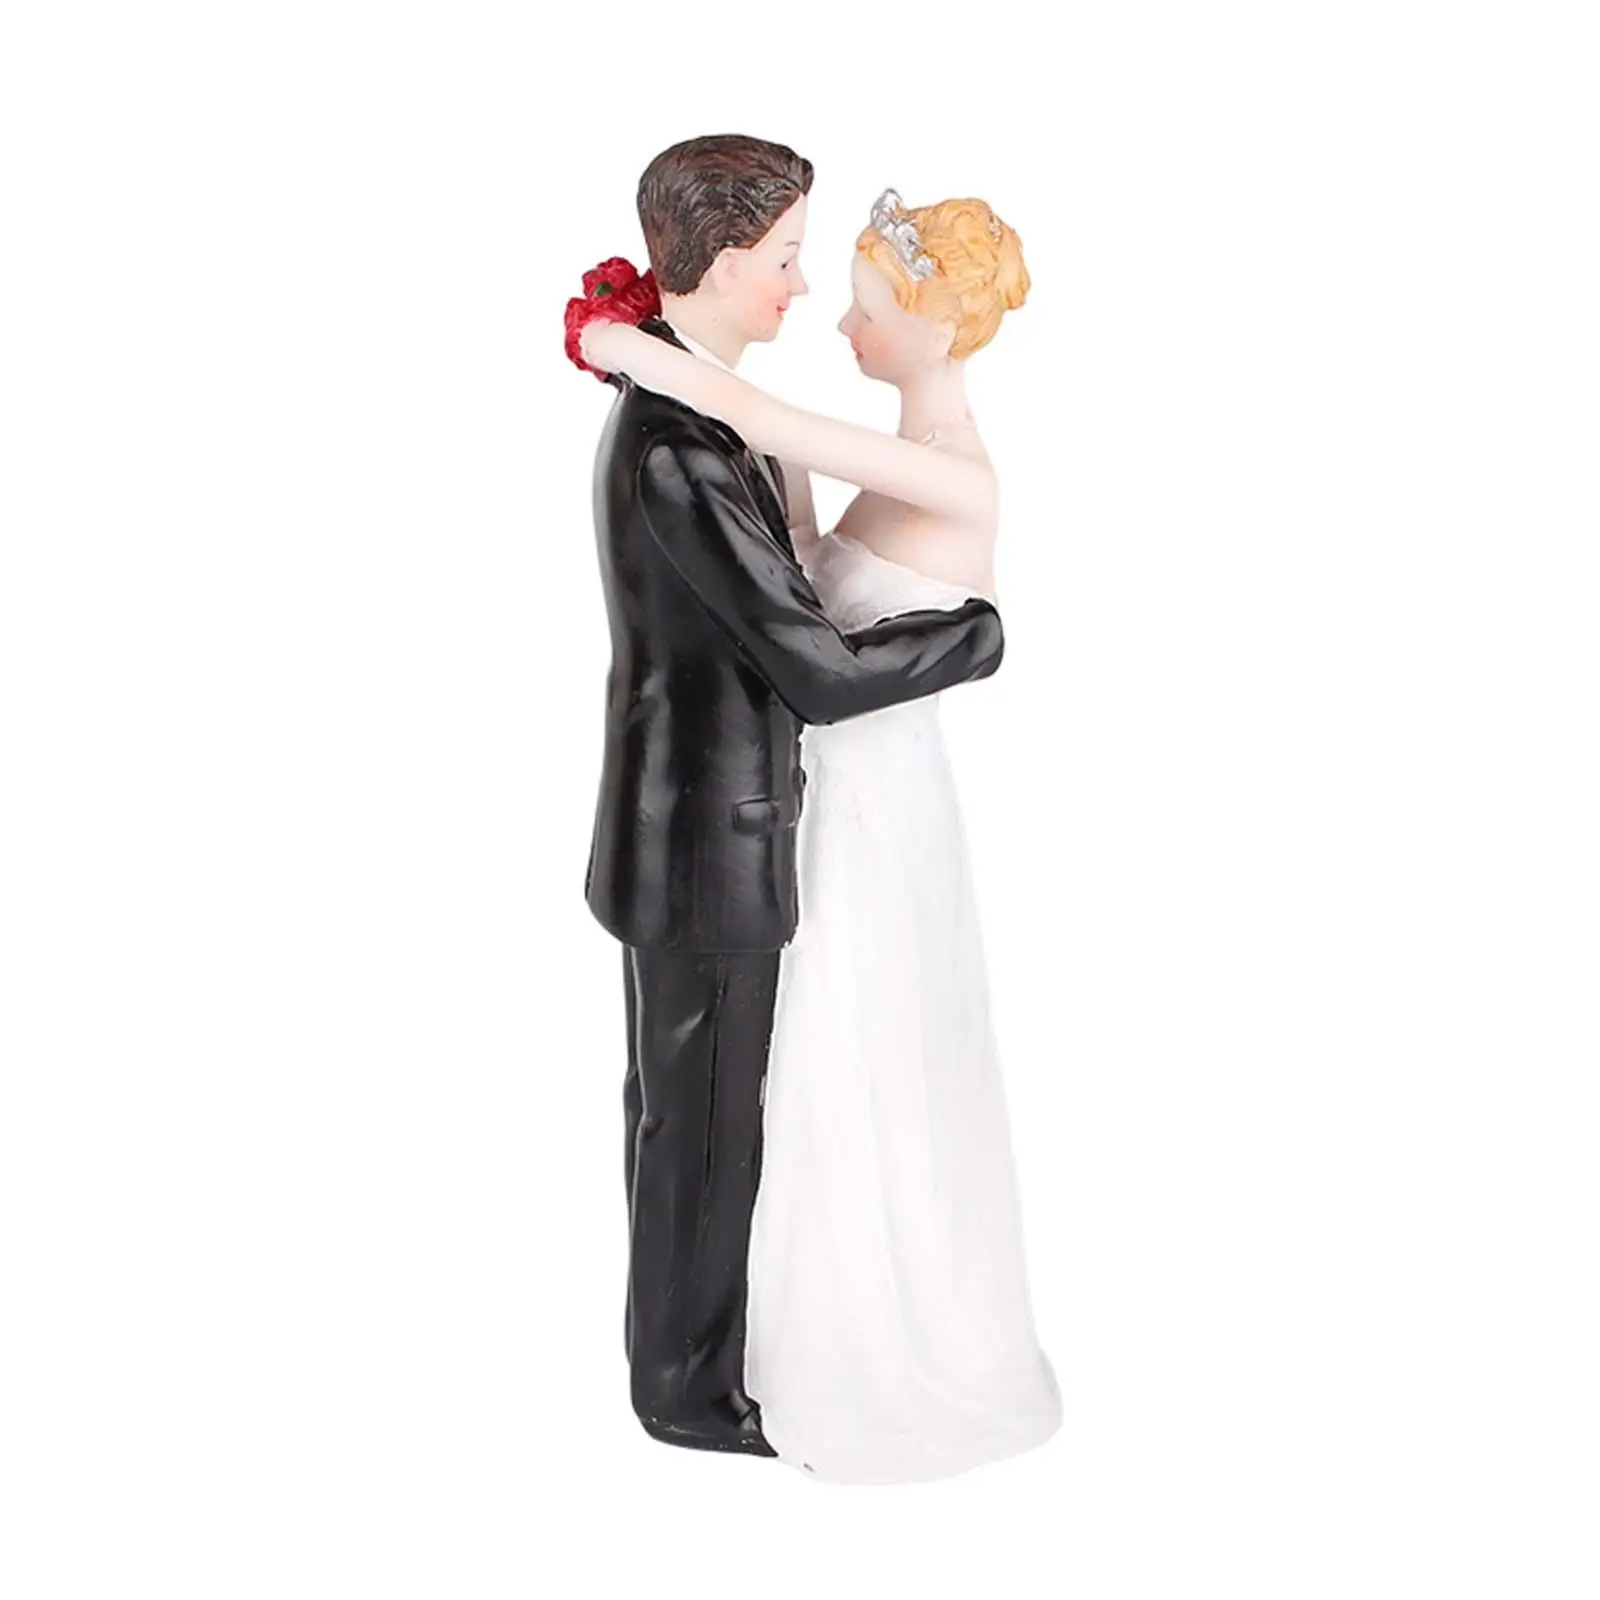 Funny Couple Statue 1Pcs Wedding Cake Topper for Engagement Showers